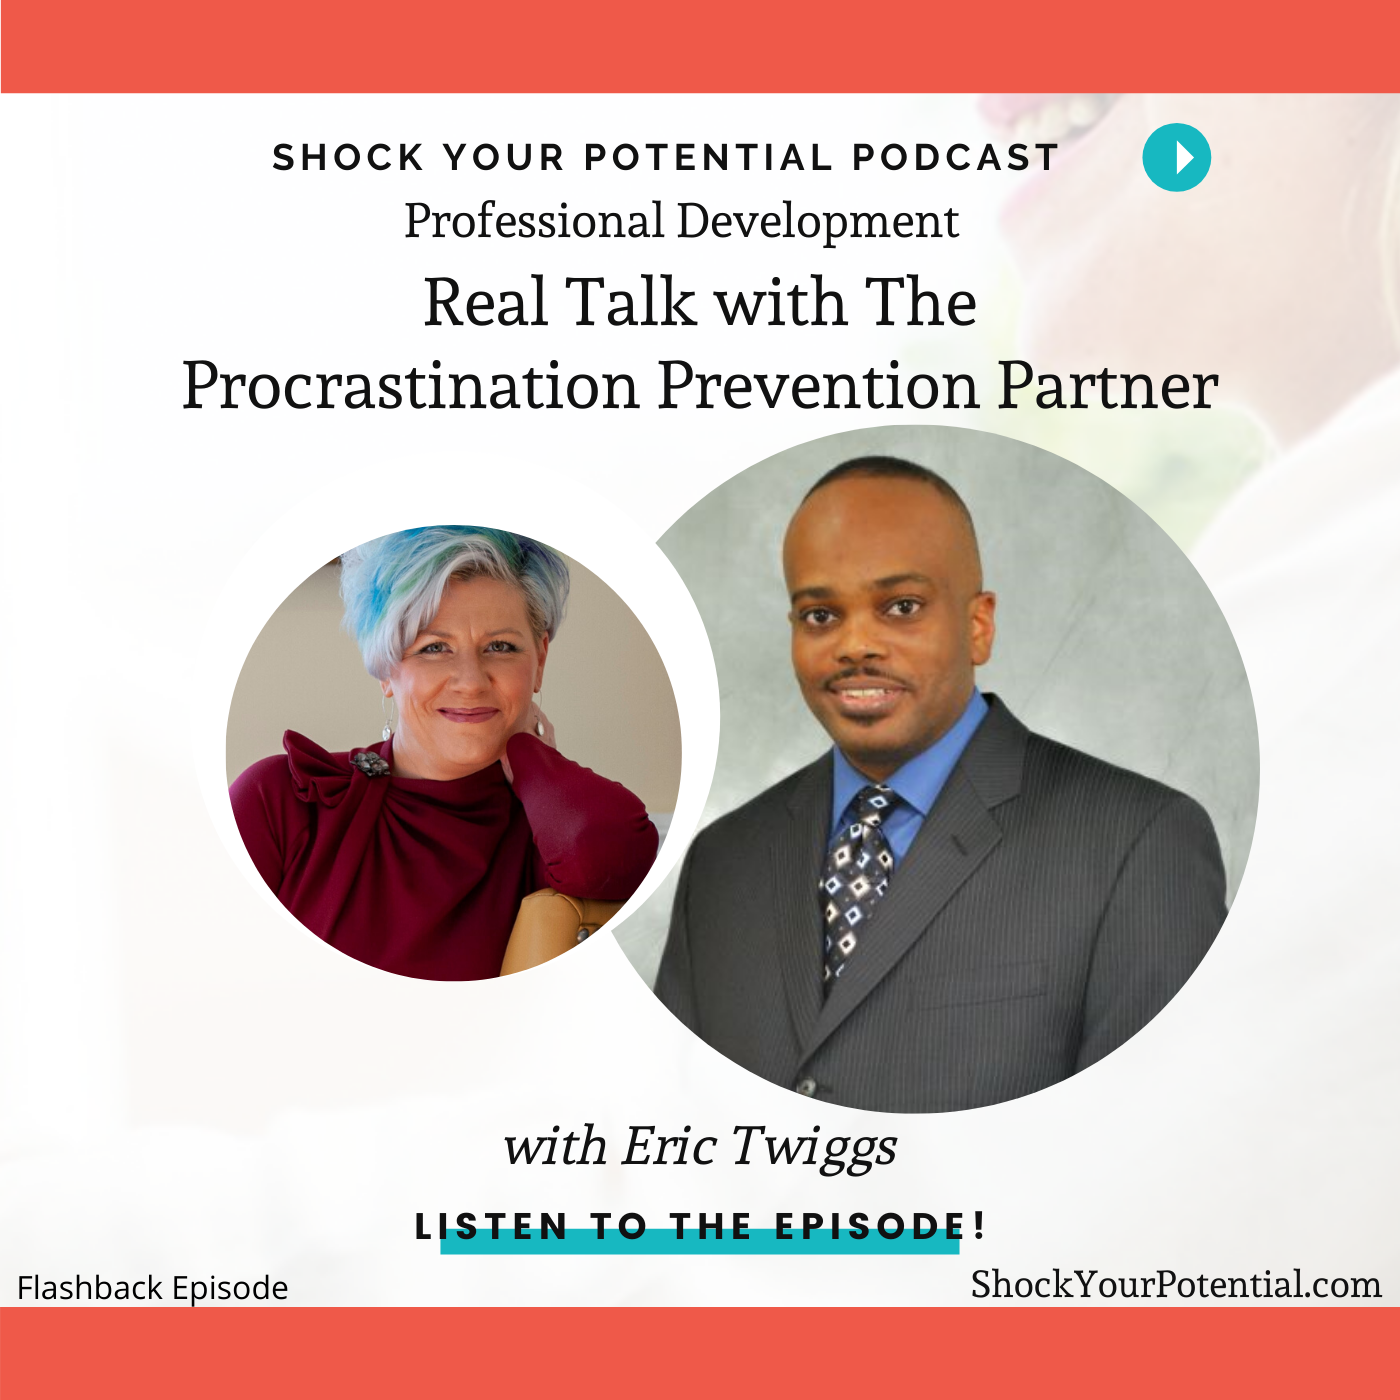 Real Talk with The Procrastination Prevention Partner – Eric Twiggs